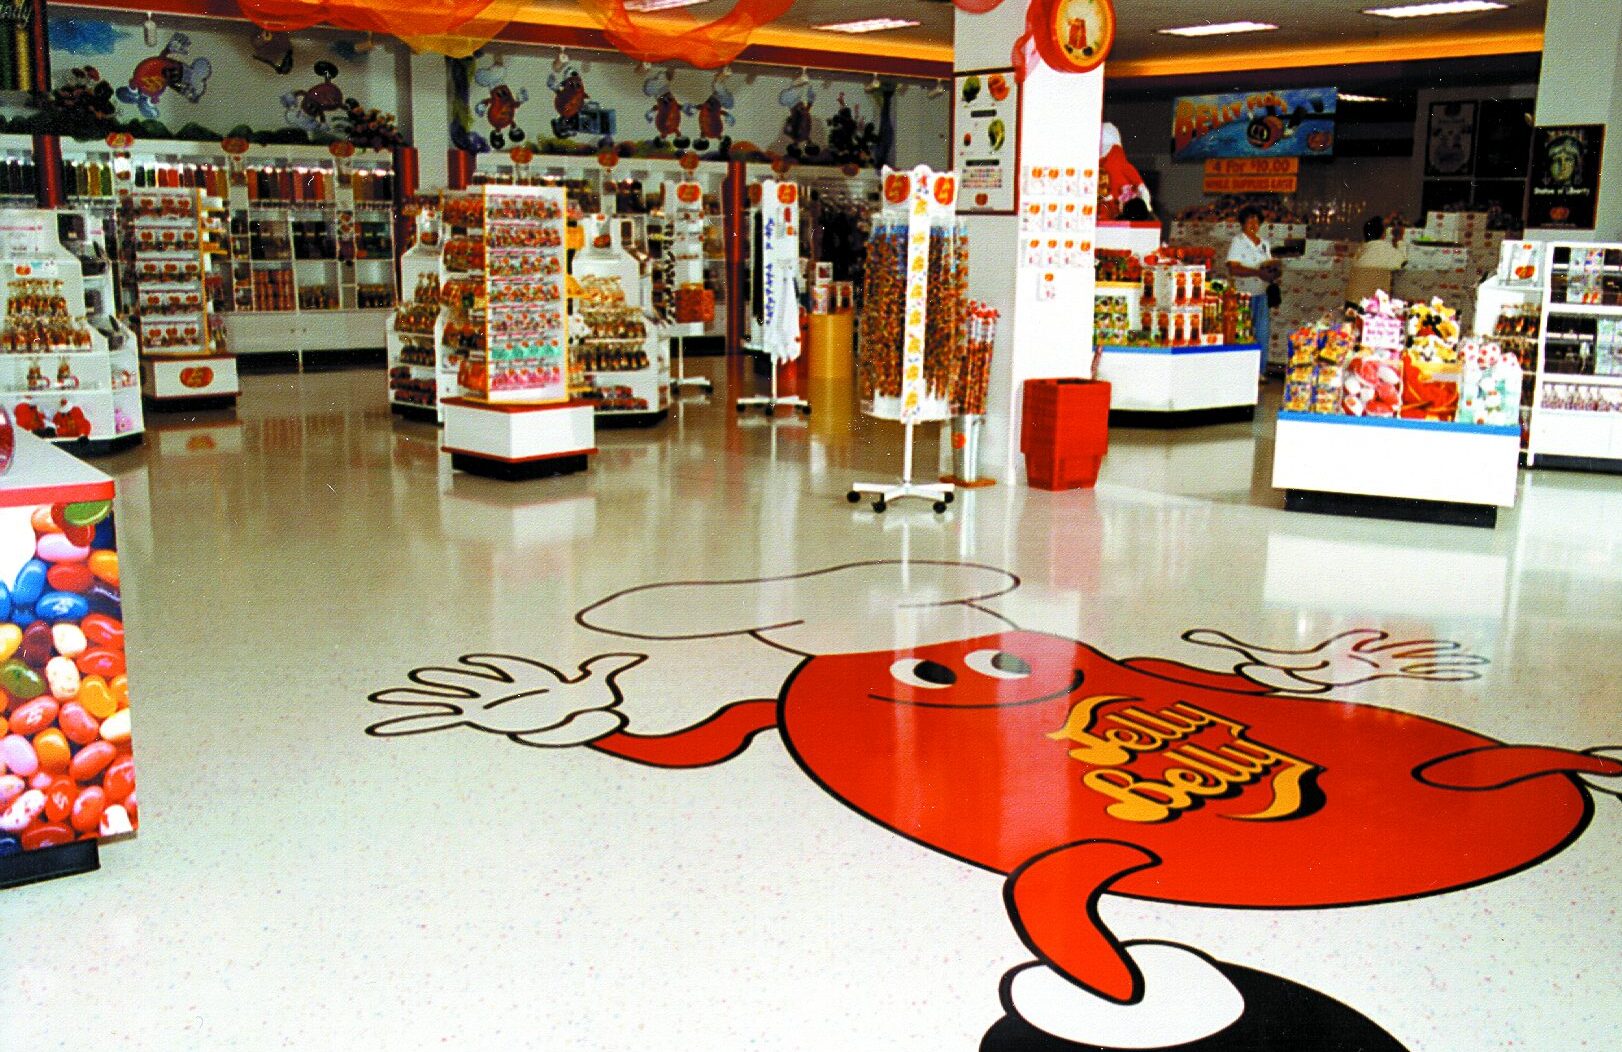 interior view of Jelly Belly candy store